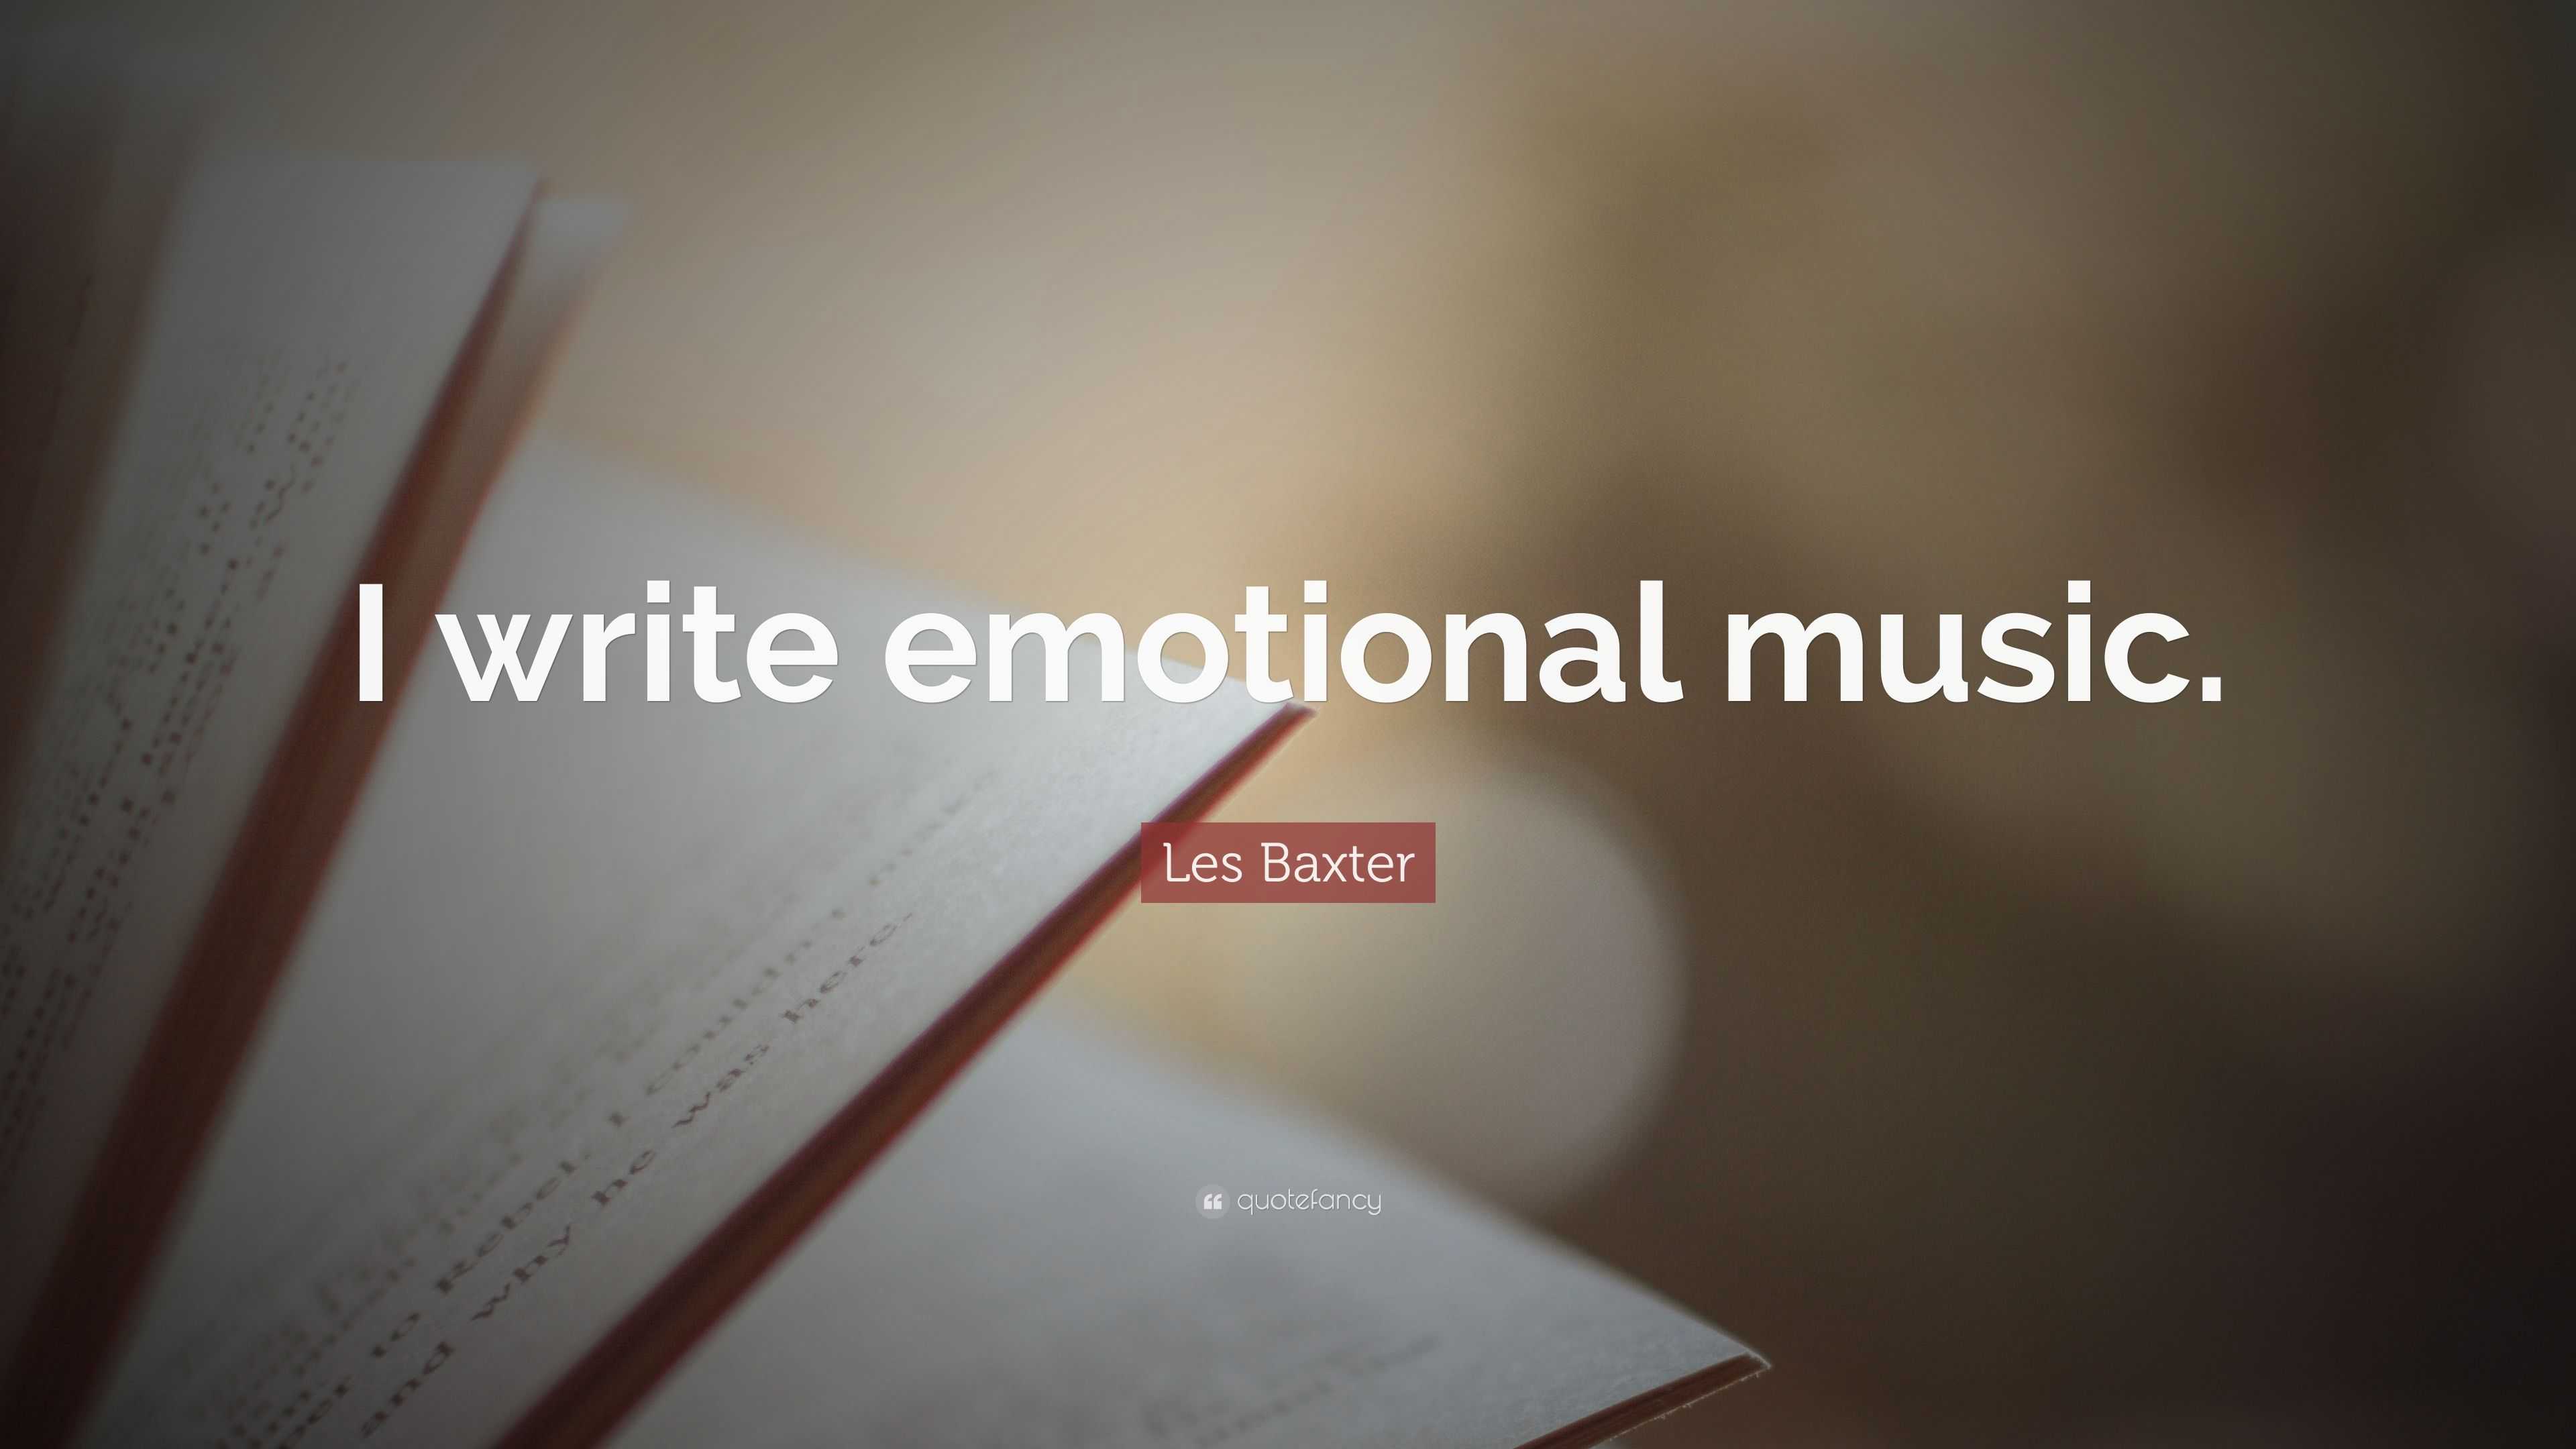 Les Baxter Quote: “I write emotional music.”